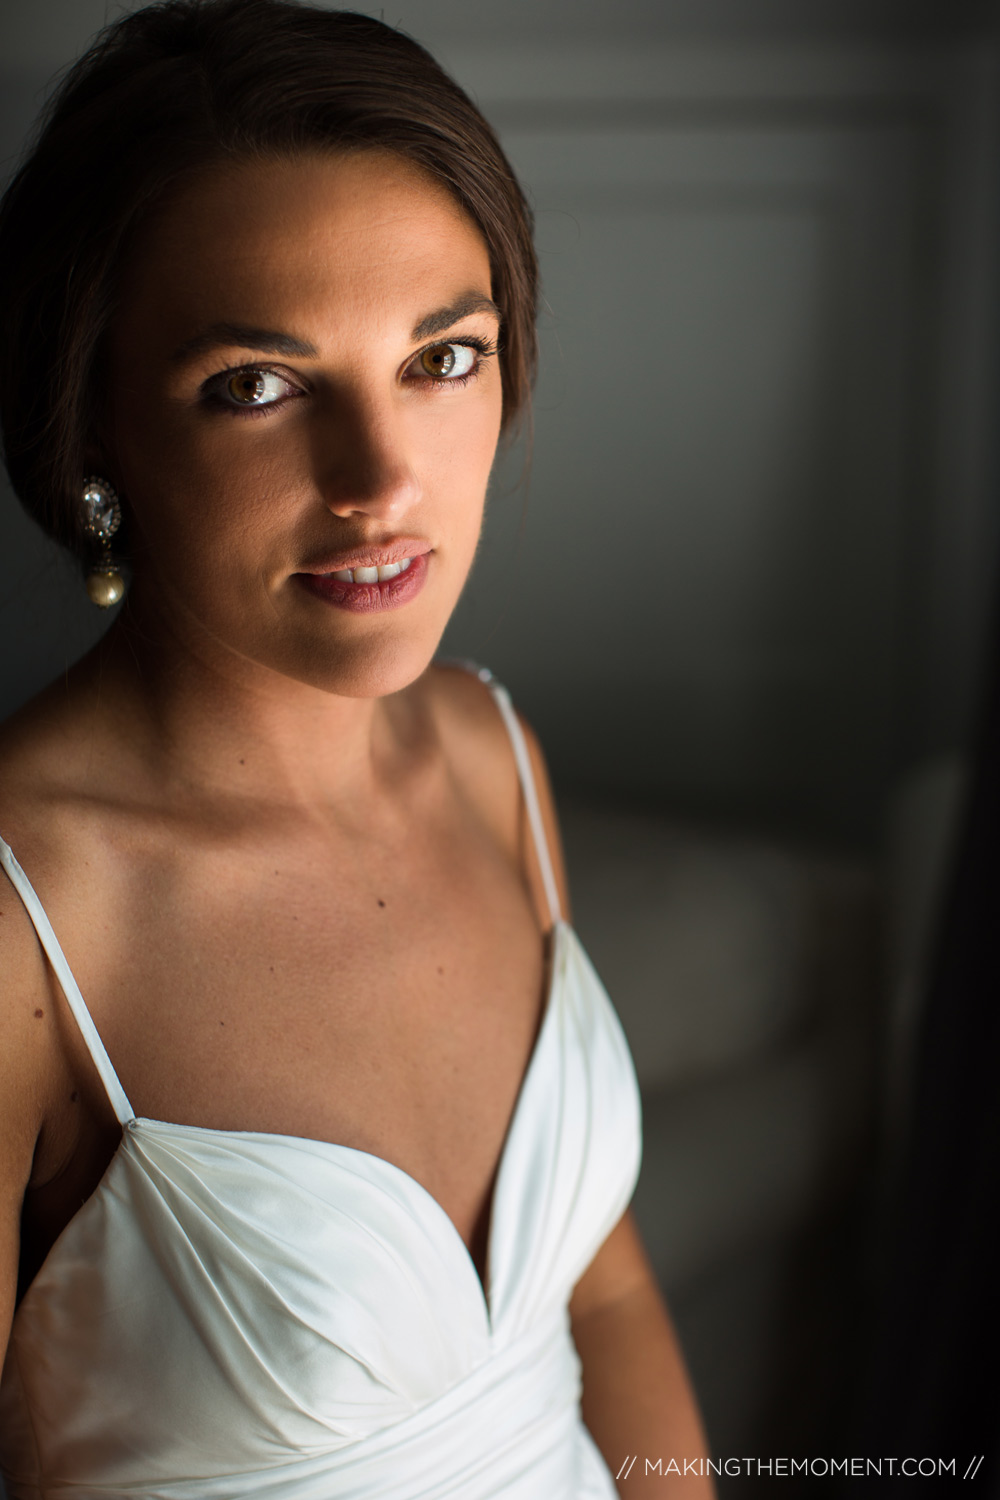 Wedding Photography in Cleveland